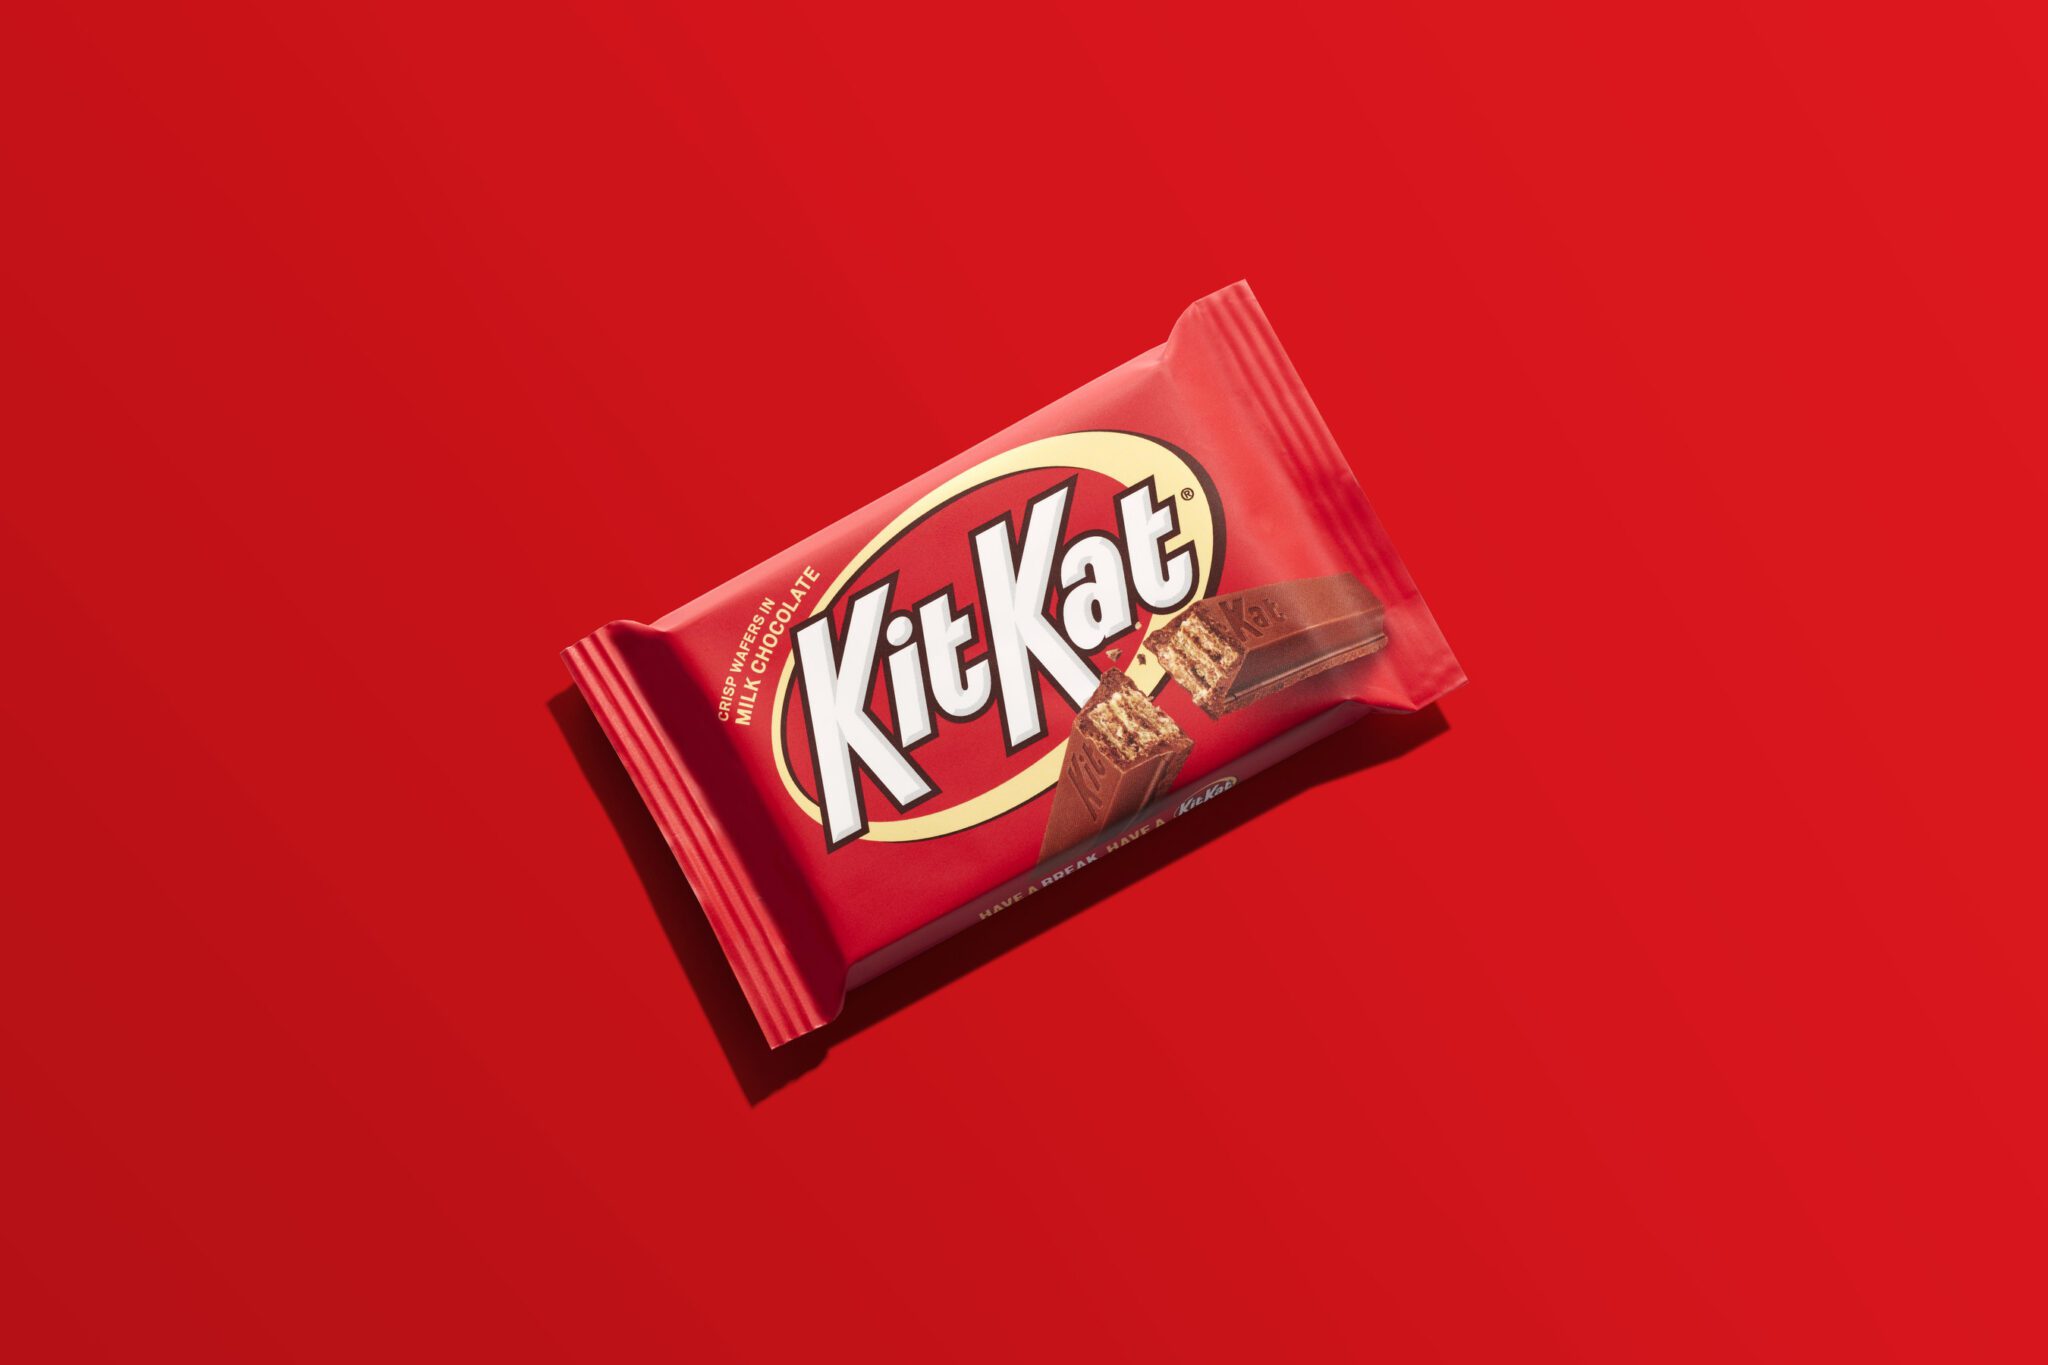 New Kit Kat Flavor Club gives the chance to taste indevelopment products